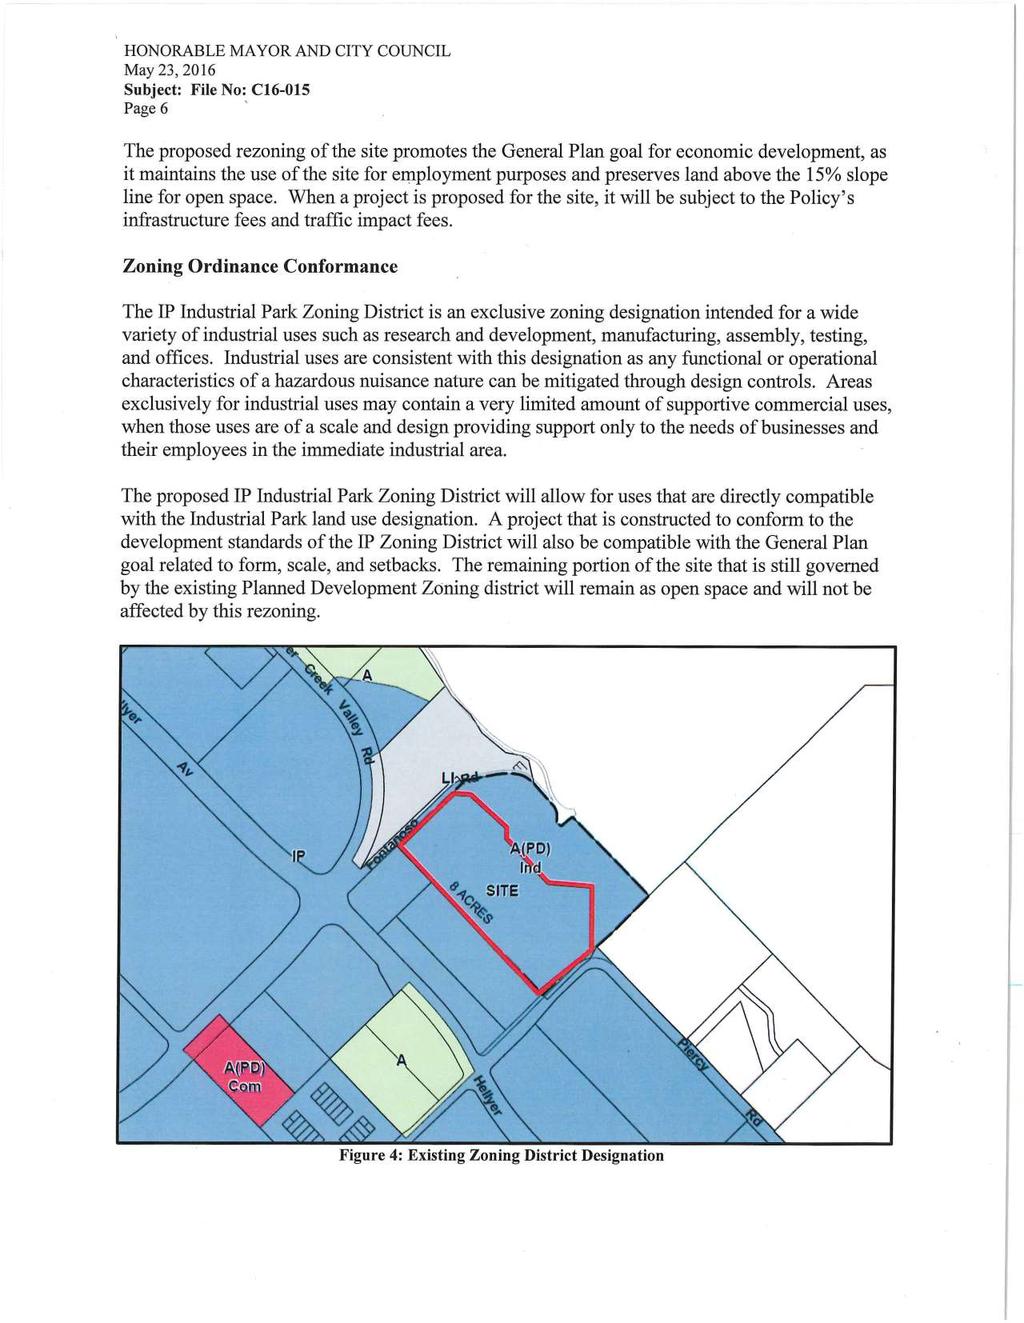 Page 6 The proposed rezoning of the site promotes the General Plan goal for economic development, as it maintains the use of the site for employment purposes and preserves land above the 15% slope